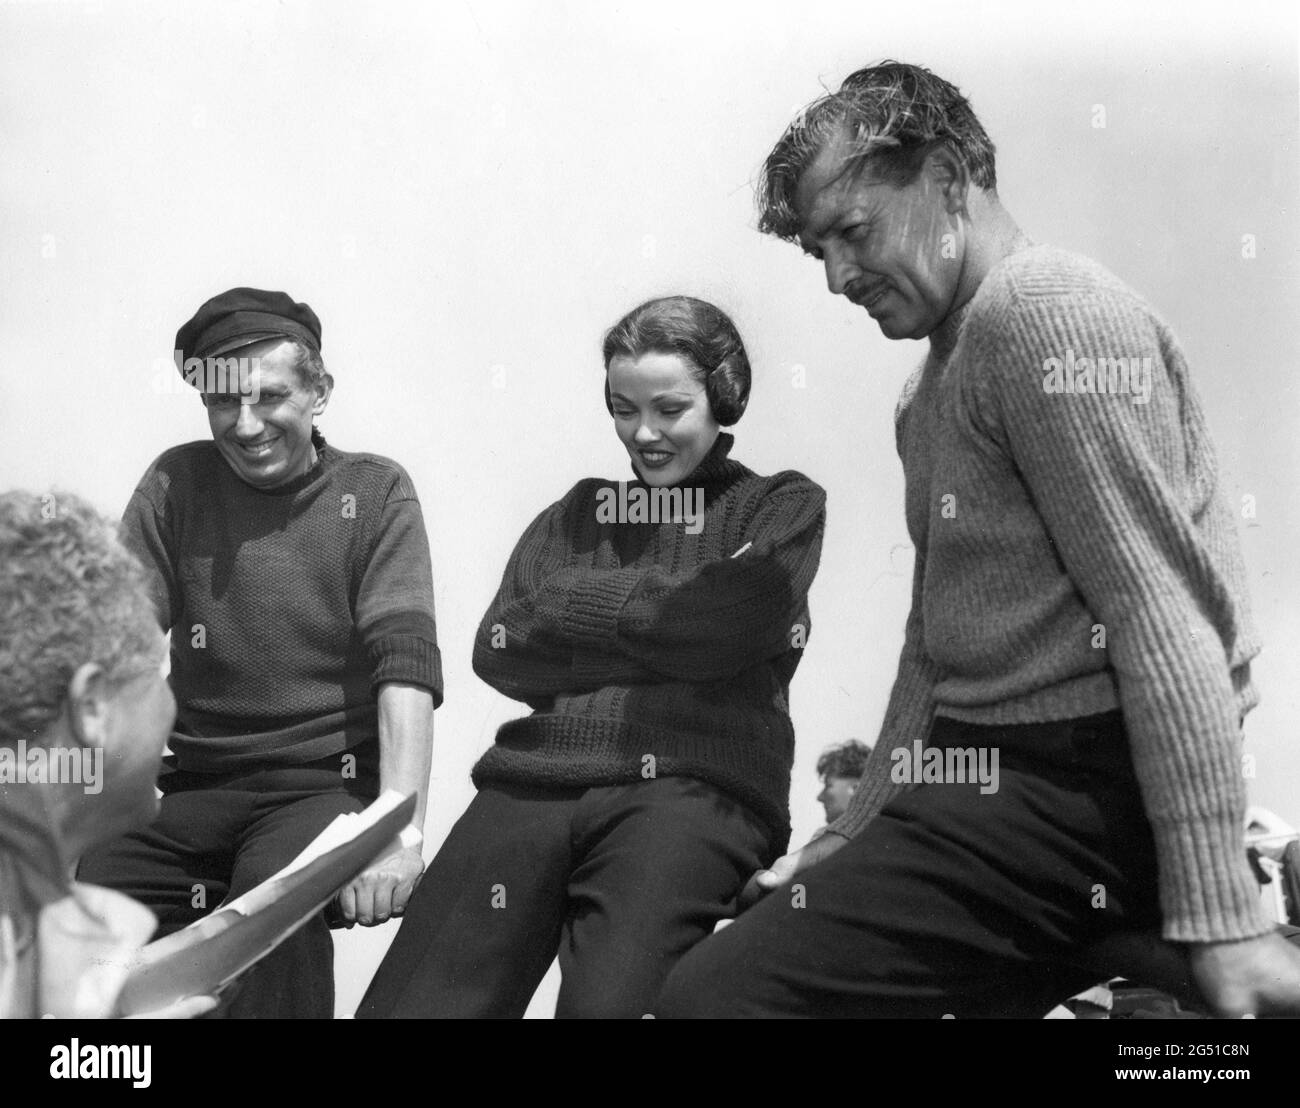 Director DELMER DAVES BERNARD MILES GENE TIERNEY and CLARK GABLE on set location candid in Cornwall England during filming of NEVER LET ME GO 1953 director DELMER DAVES from novel Come The Dawn by Paul Winterton producer Clarence Brown Metro Goldwyn Mayer Stock Photo